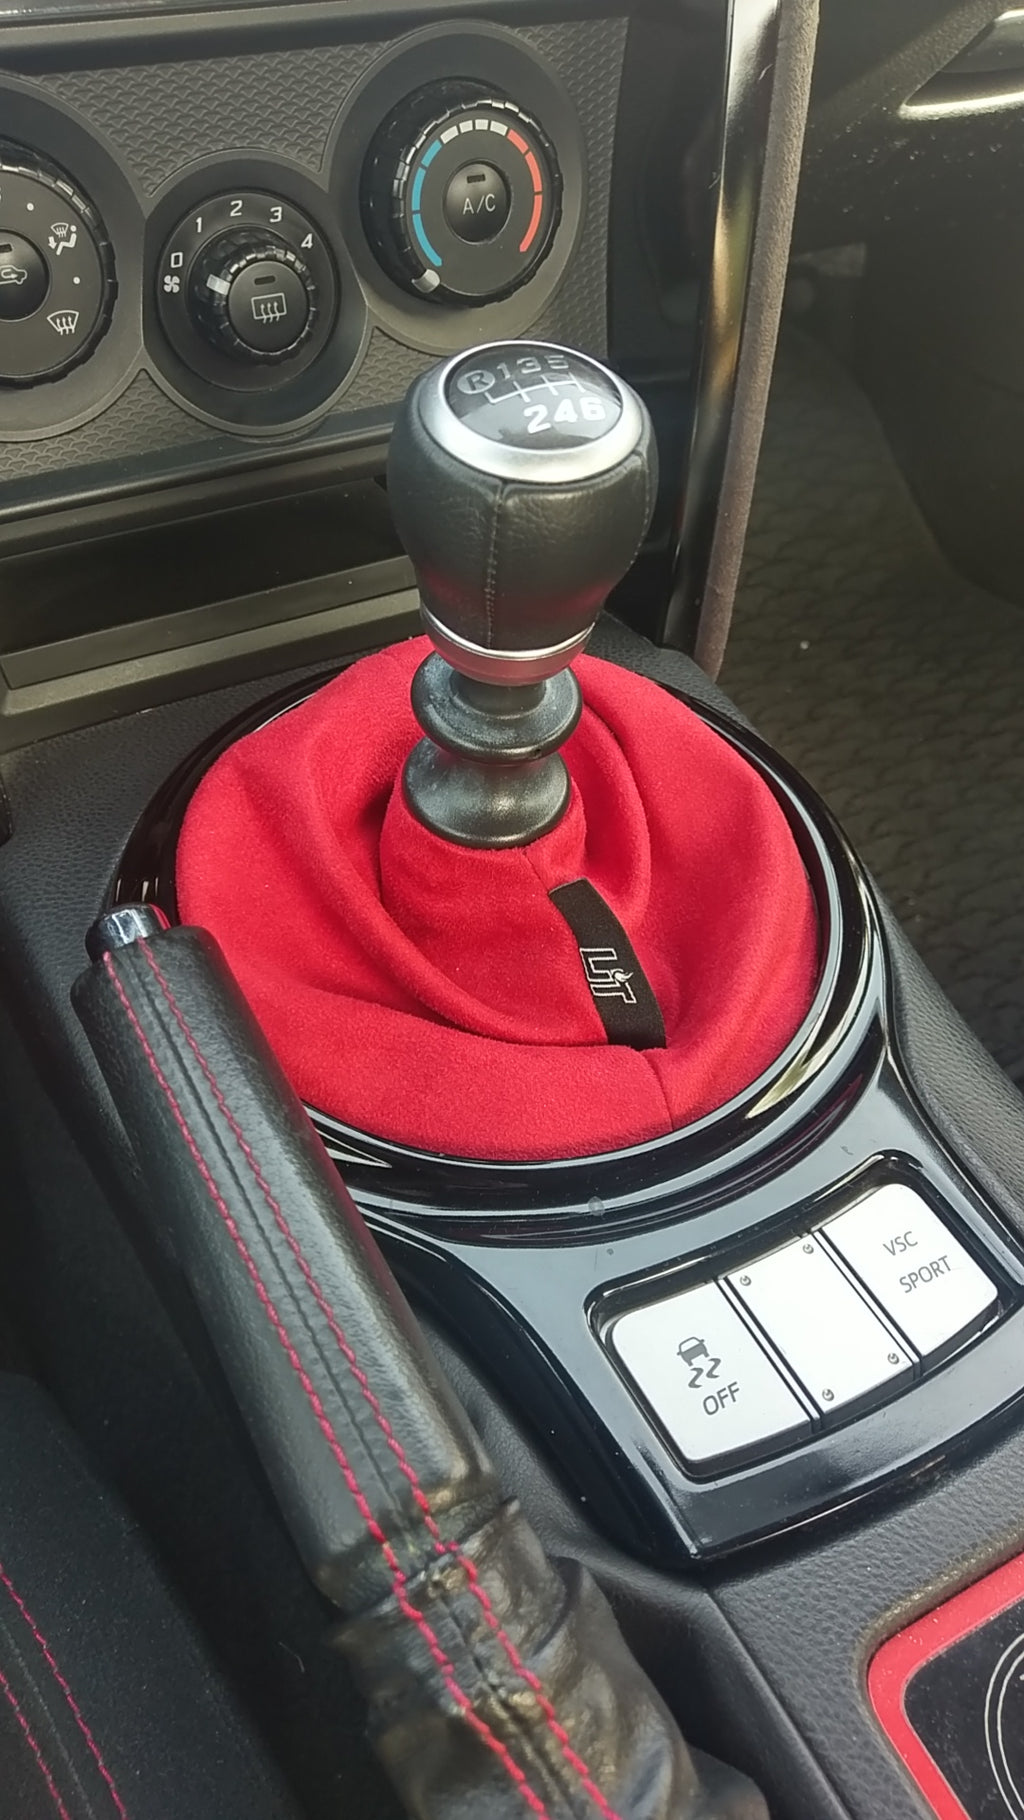 shift boot cover , shift boot cover for automatic , shift boot  wrx , shift boot cover gt86 , shift boot and ebrake boot , gear shift boot cover , jdm shift boot cover , gt86 shift boot , brz shift boot , sti shift boot , gtr shift boot , supra shift boot , silvia s13 shift boot , silvia s14 shift boot , 350z shift boot cover , 370z shift boot , shift boot retainer , shift boot ring , shift boot for cars , evo shift boot cover , dsg shift boot cover , universal shift boot cover , red suede shift boot